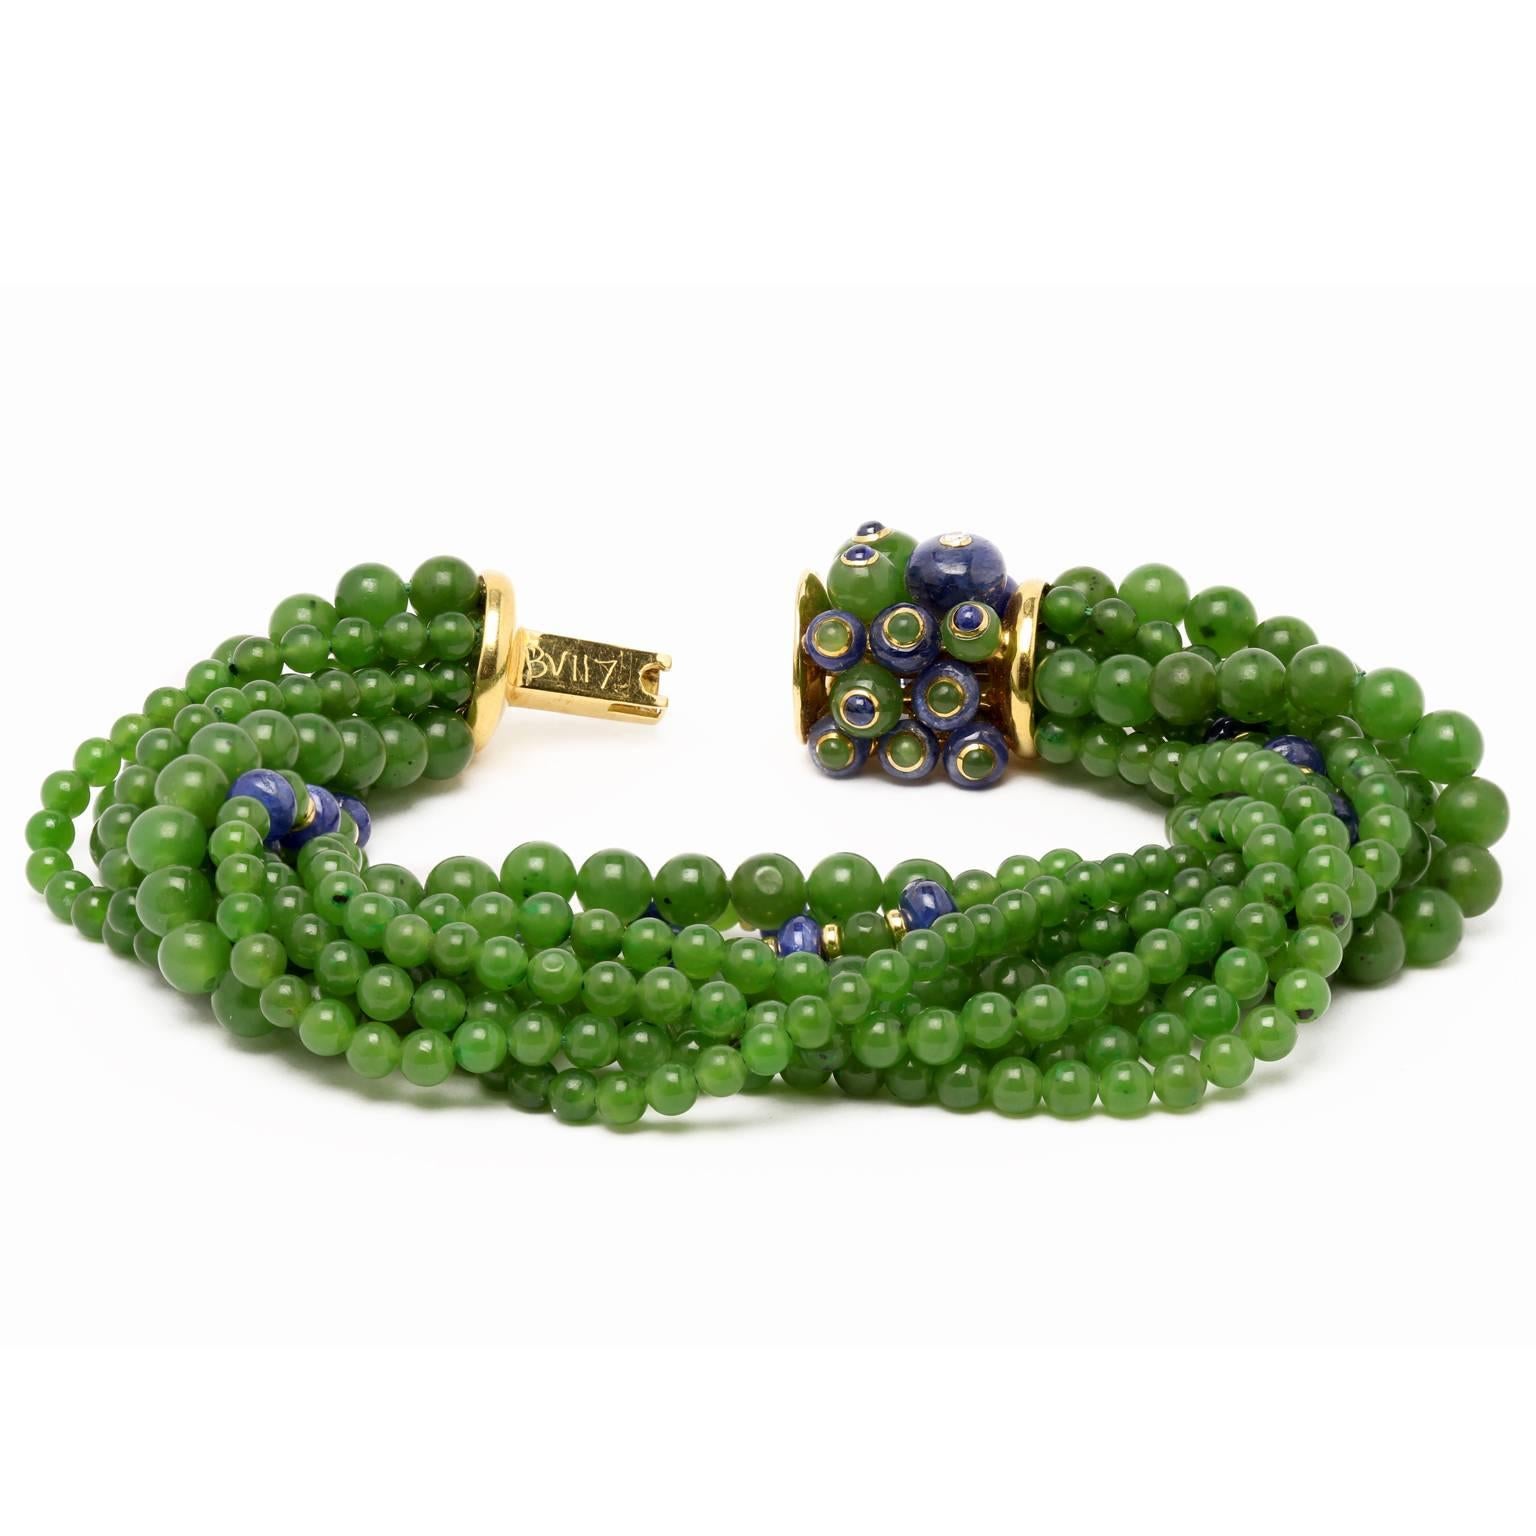 Trianon Jade Bracelet

18K yellow gold
Nine 8.25mm strands of 4mm jade beads 
Eighteen 3.5mm sapphire beads (approximately 41cts)

20mm box clasp with 17 sapphire and jade beads